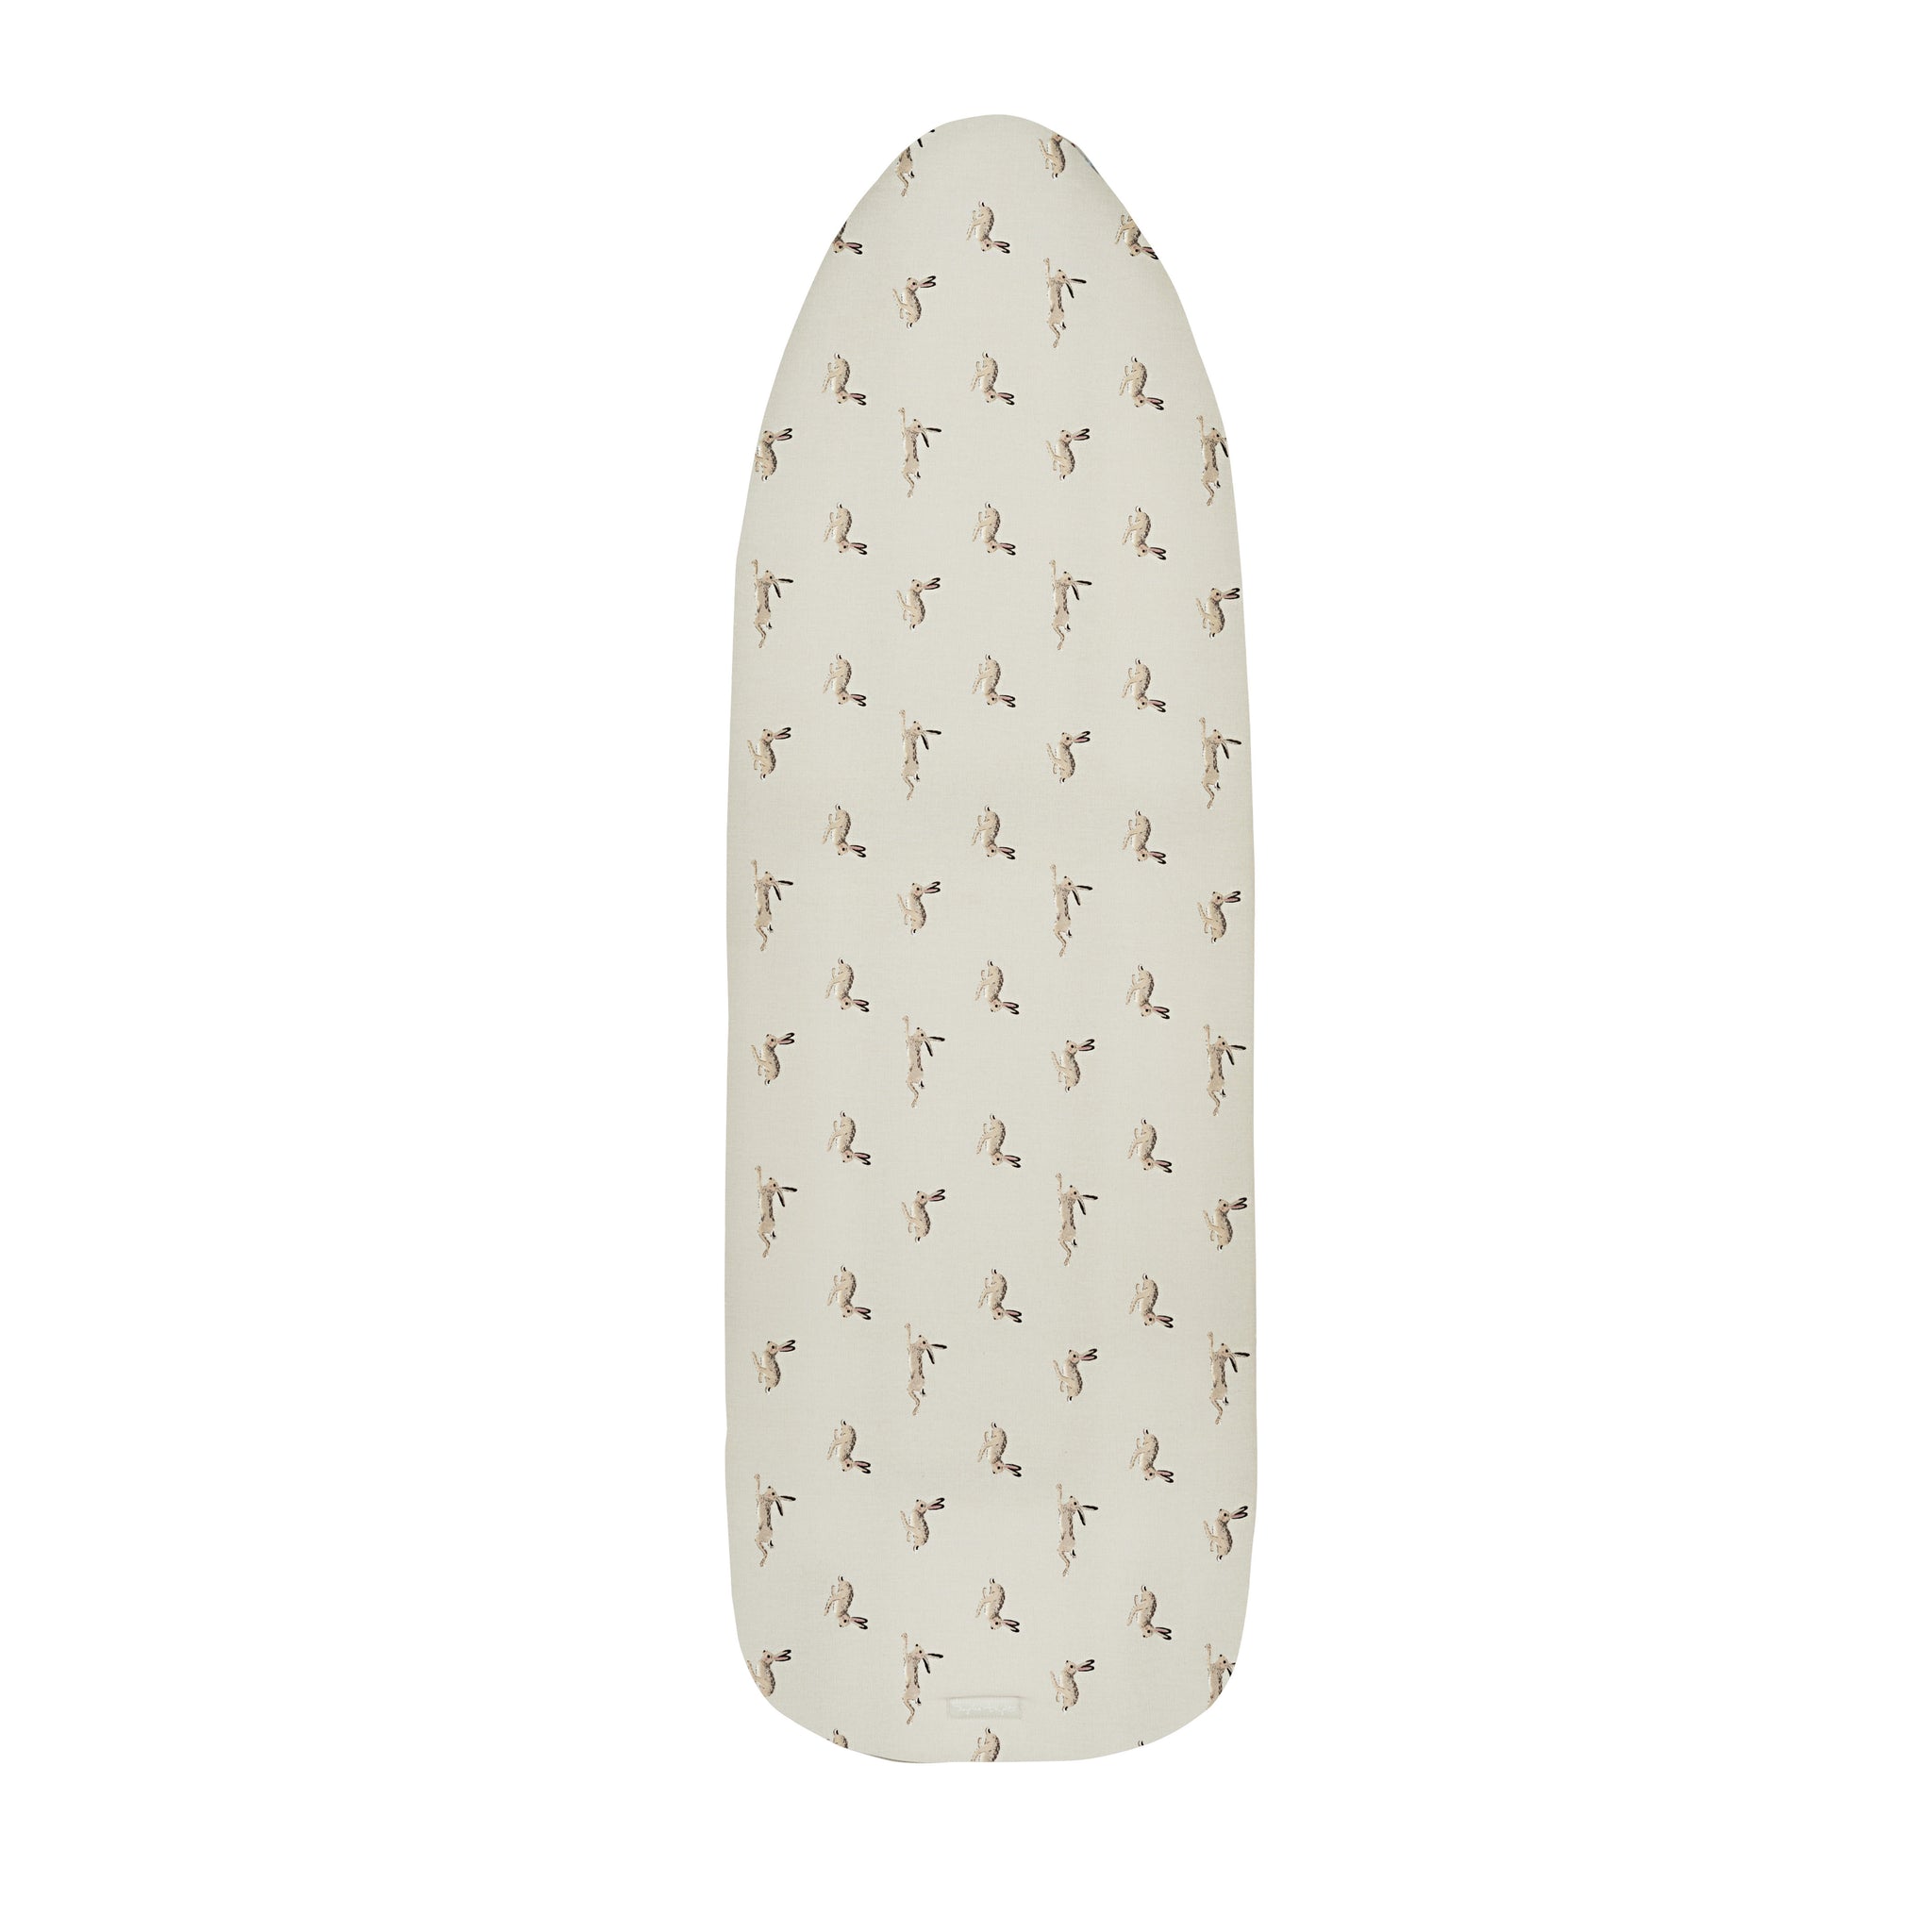 Hare Ironing Board Cover